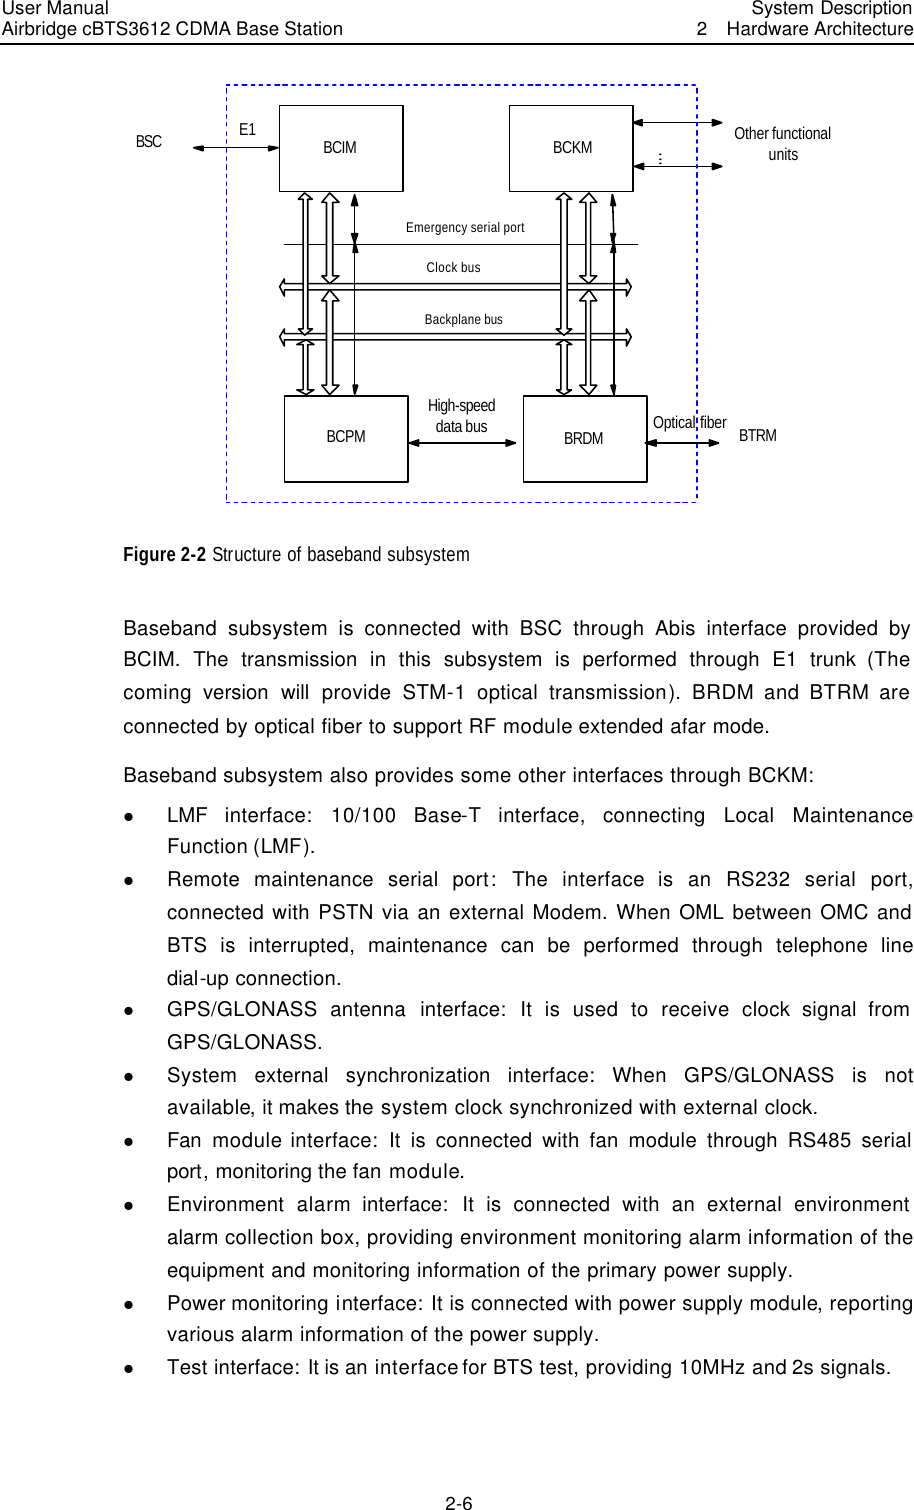 User Manual Airbridge cBTS3612 CDMA Base Station   System Description2  Hardware Architecture 2-6 High-speeddata busBCIMBSCBRDMBCKMBCPM BTRMOther functionalunits   E1Optical fiberClock bus Backplane busEmergency serial port... Figure 2-2 Structure of baseband subsystem Baseband  subsystem is connected with BSC through Abis interface provided by BCIM. The transmission in this subsystem is performed through E1 trunk (The coming version will provide STM-1 optical transmission).  BRDM and BTRM are connected by optical fiber to support RF module extended afar mode. Baseband subsystem also provides some other interfaces through BCKM: l LMF  interface:  10/100 Base-T  interface,  connecting Local Maintenance Function (LMF).   l Remote maintenance serial port:  The  interface is an RS232 serial port, connected with PSTN via an external Modem. When OML between OMC and BTS is interrupted, maintenance can be performed through telephone line dial-up connection. l GPS/GLONASS antenna interface:  It is used to receive clock signal from GPS/GLONASS.   l System external synchronization interface:  When GPS/GLONASS is not available, it makes the system clock synchronized with external clock. l Fan  module interface:  It is connected with fan module through RS485 serial port, monitoring the fan module. l Environment  alarm interface:  It is connected with an external environment alarm collection box, providing environment monitoring alarm information of the equipment and monitoring information of the primary power supply. l Power monitoring interface: It is connected with power supply module, reporting various alarm information of the power supply. l Test interface: It is an interface for BTS test, providing 10MHz and 2s signals.   